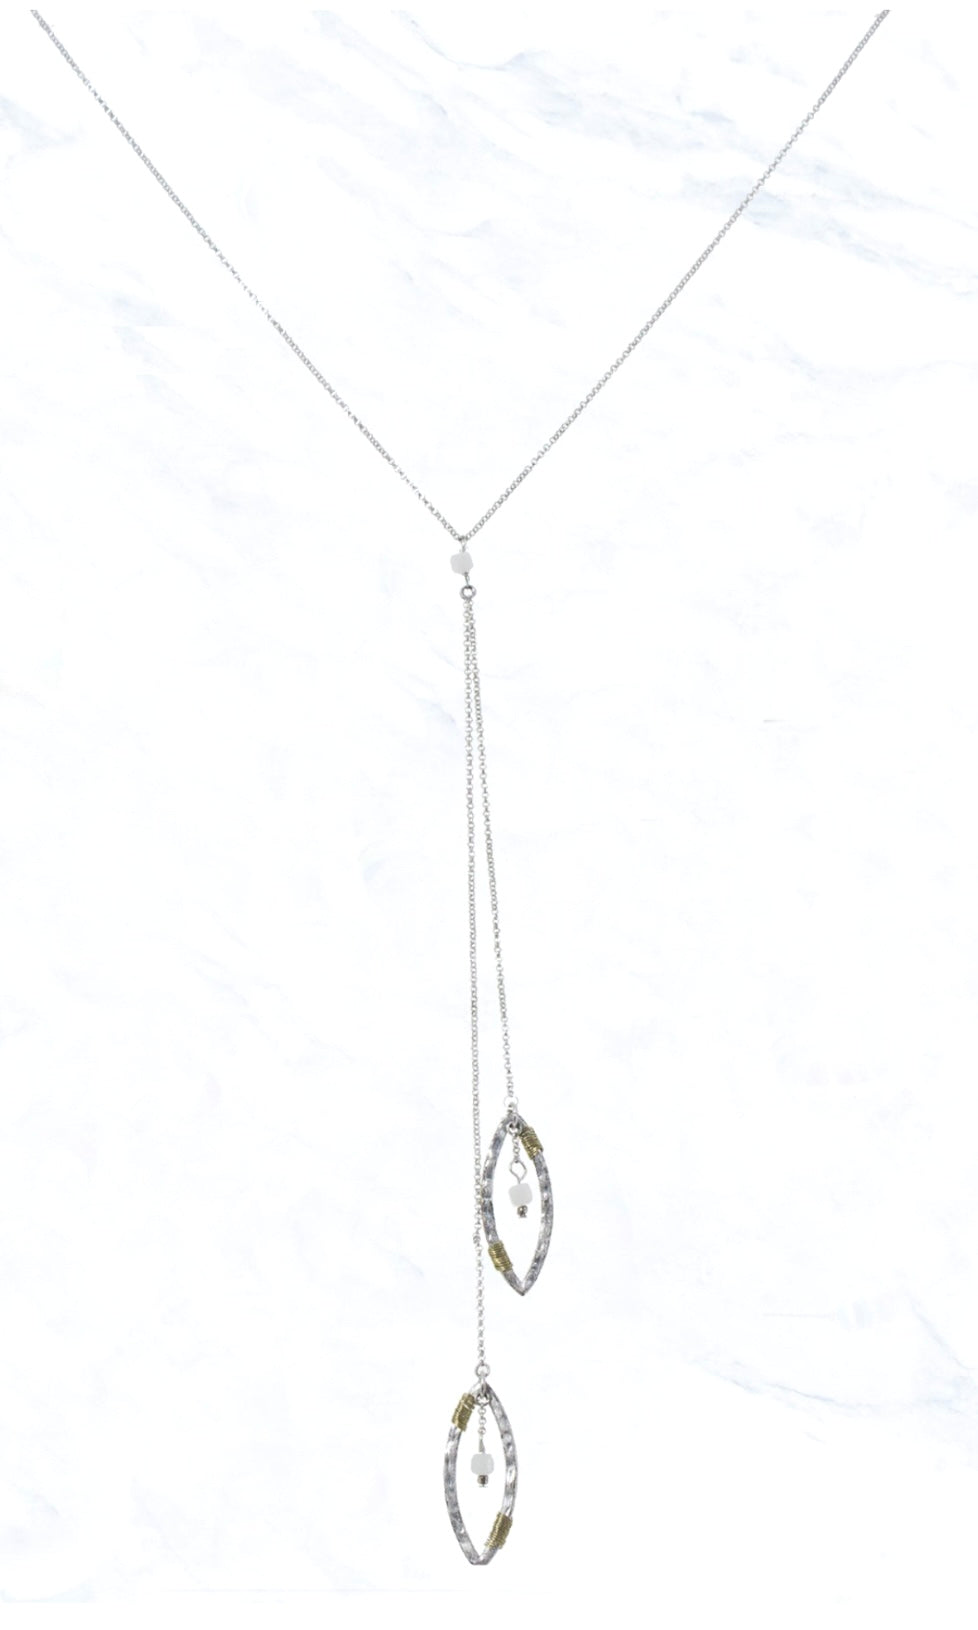 Necklace Worn Silver Wire Wrapped Pointed Oval Crystal Charm Lariat Necklace